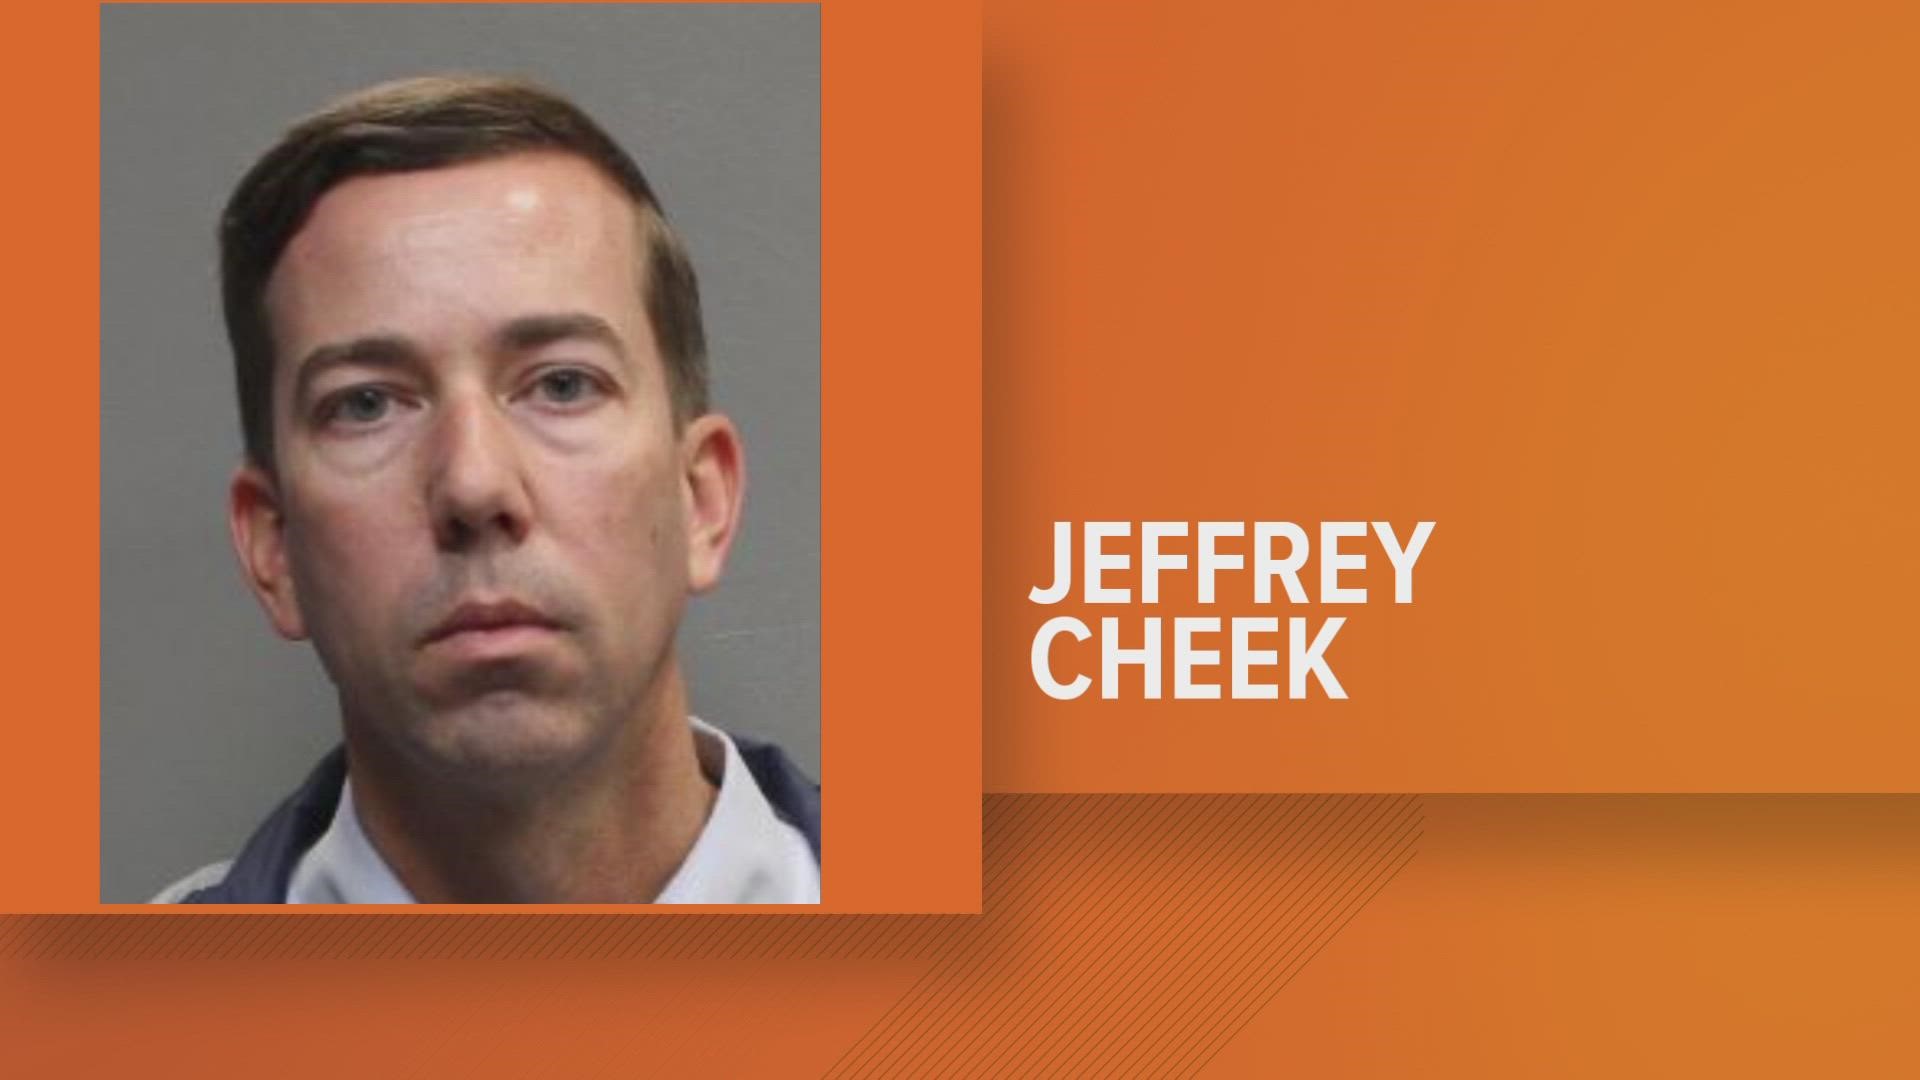 Jeffrey Cheek was charged with aggravated assault after authorities said he left his home with a gun after a minor rang his doorbell and ran away in June 2021.